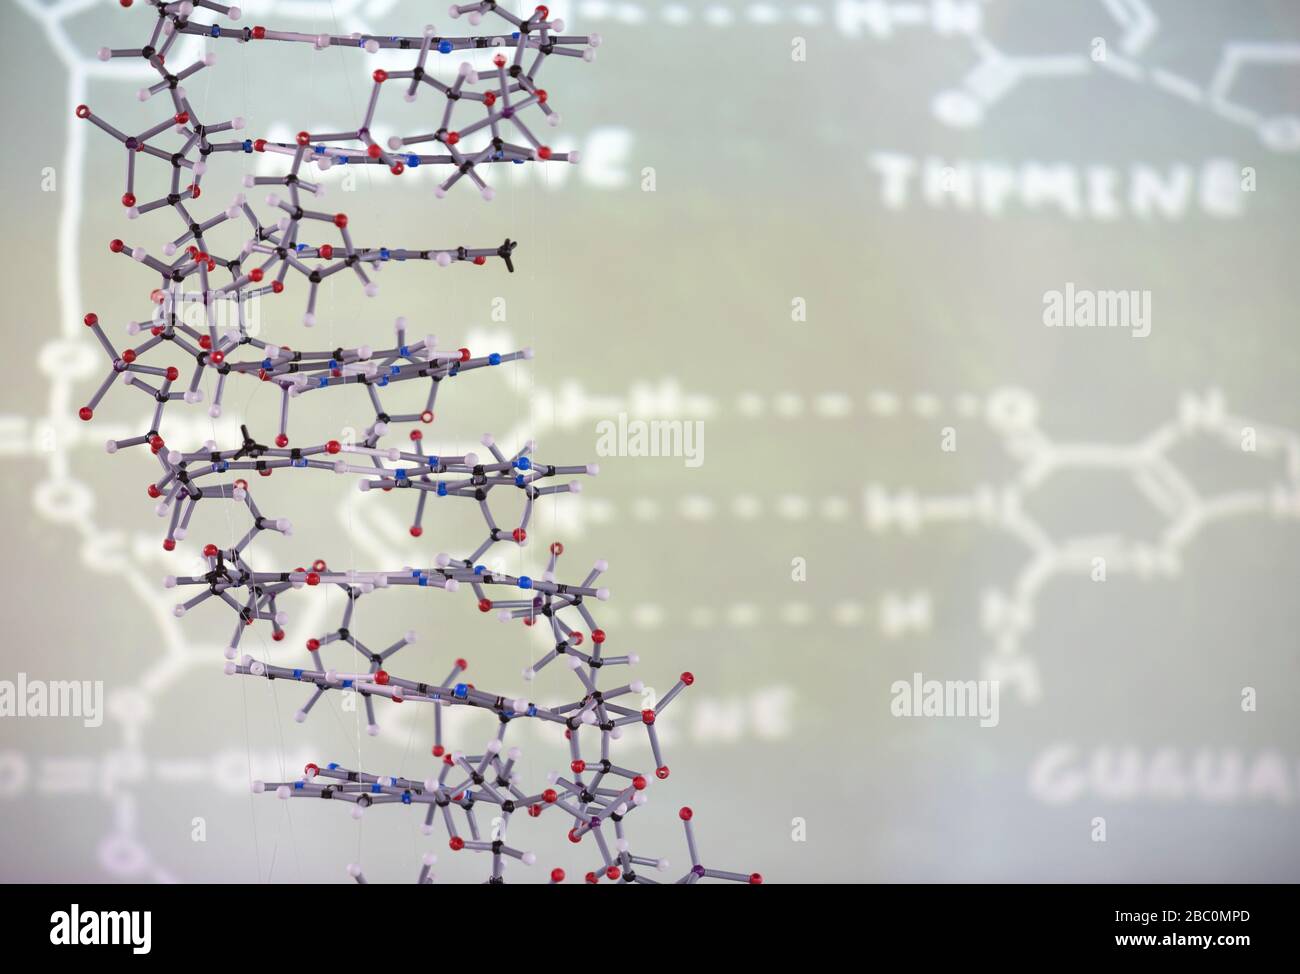 Molecular structure in front of data on projection screen in classroom Stock Photo